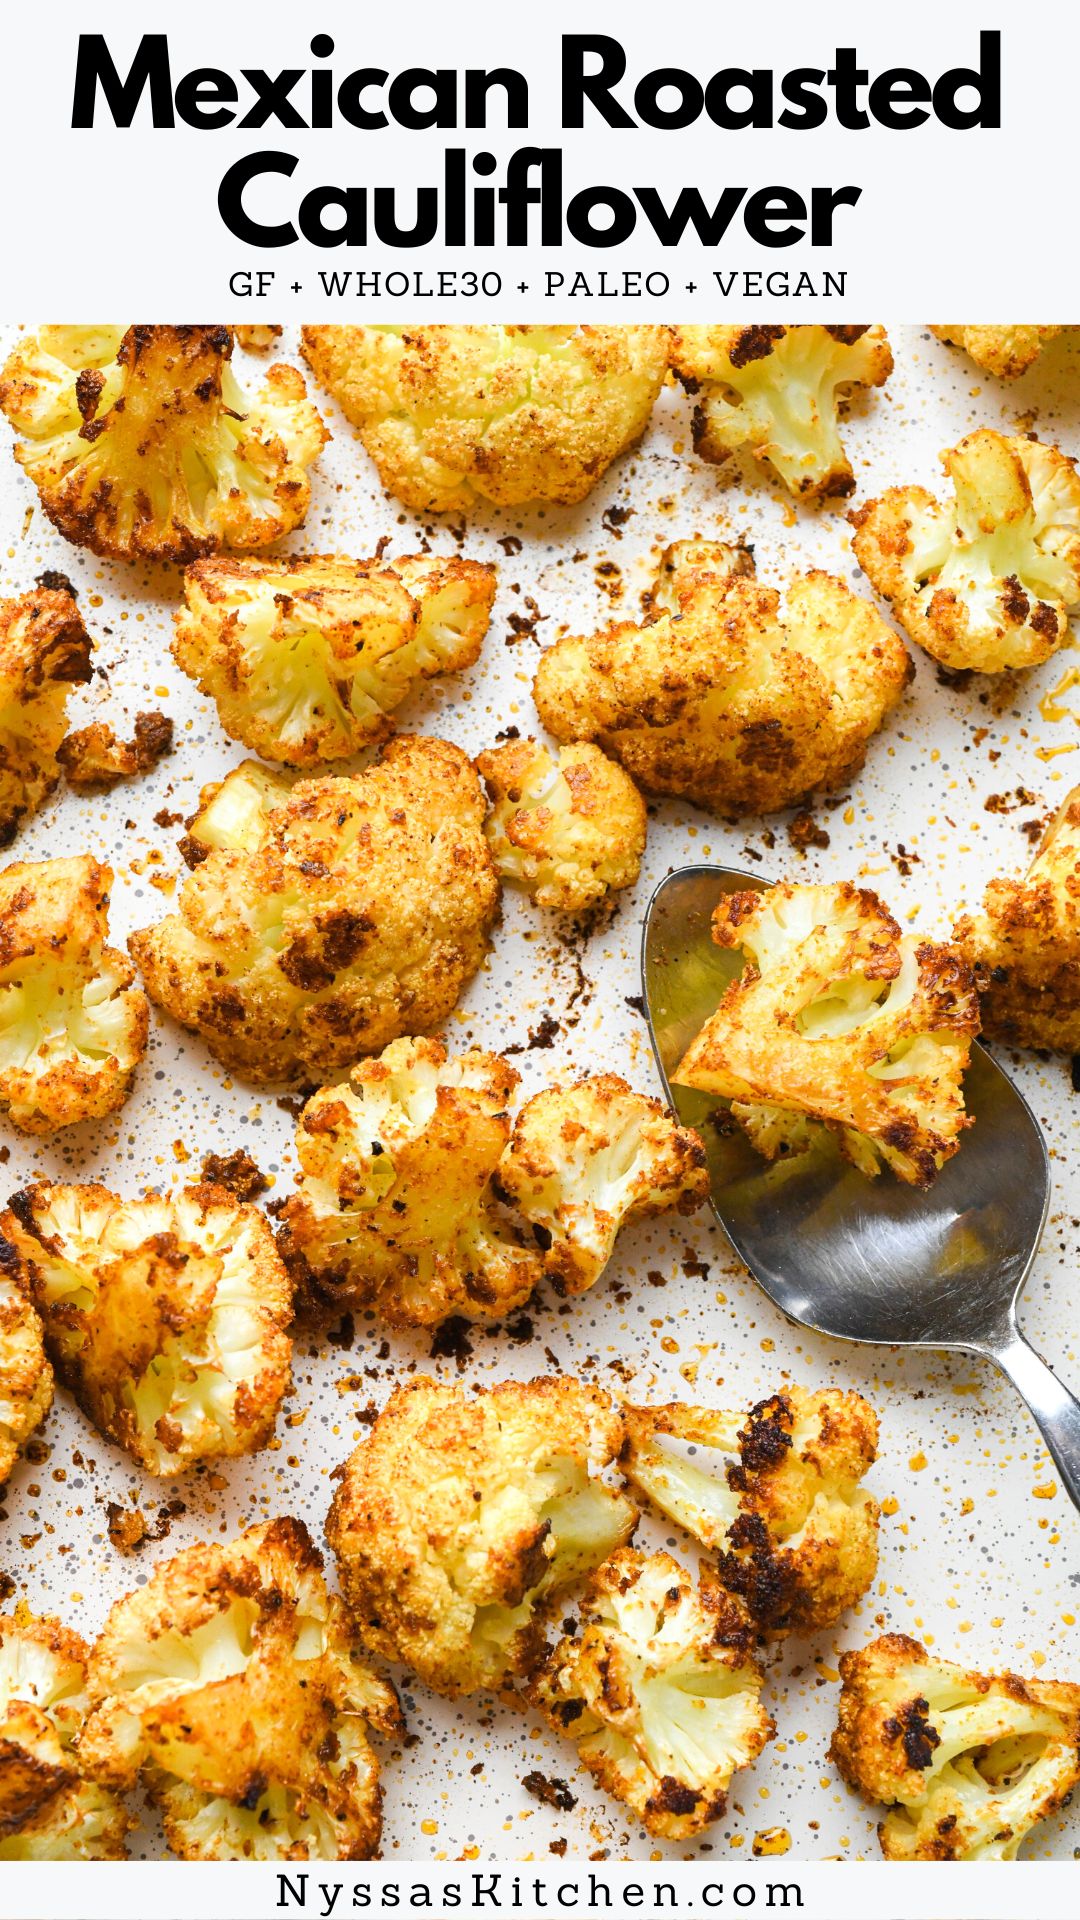 Mexican inspired roasted cauliflower is so flavorful and easy it might just become your new favorite veggie side dish! Cauliflower florets are tossed with flavorful spices and roasted until crispy and caramelized, served with a healthy squeeze of lime juice, cilantro, red onion, and maybe even some avocado for good measure. Gluten free, paleo, vegan, AND whole30 friendly!